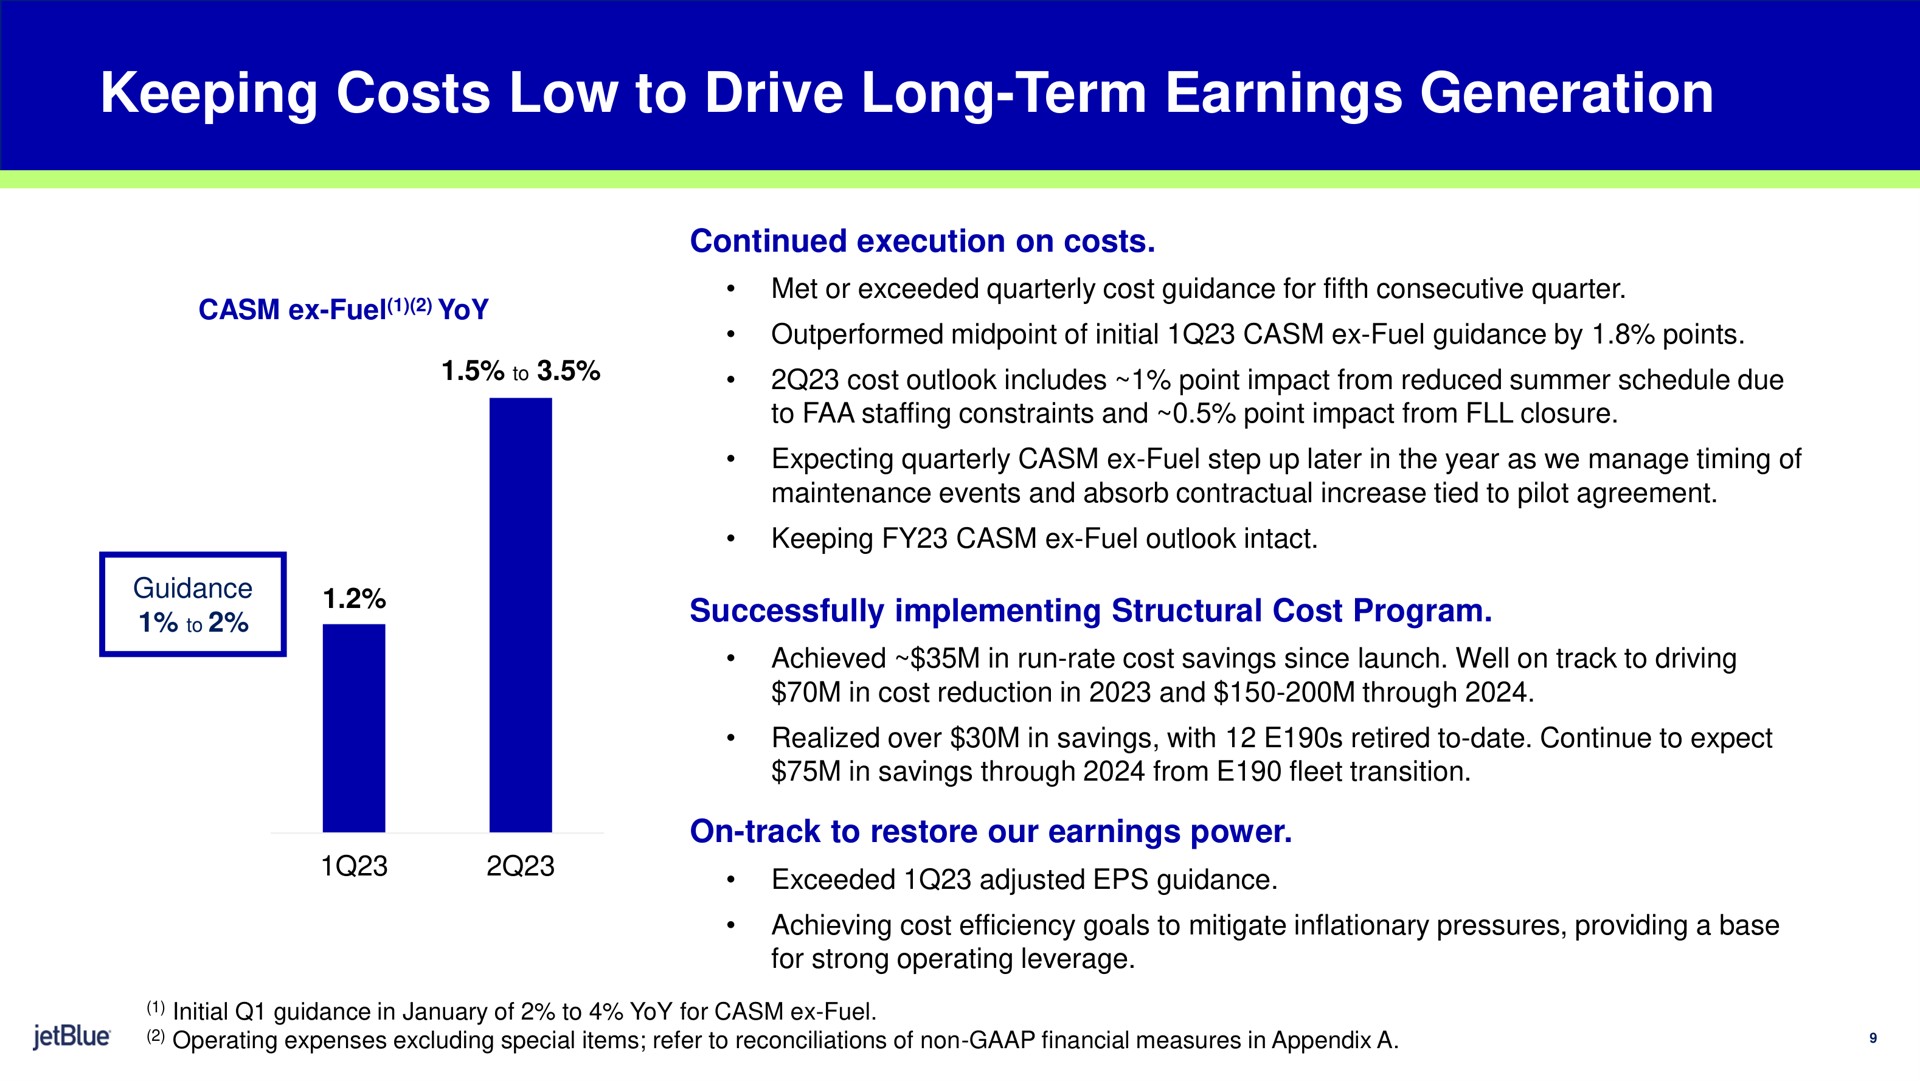 keeping costs low to drive long term earnings generation continued execution on costs successfully implementing structural cost program on track to restore our earnings power | jetBlue